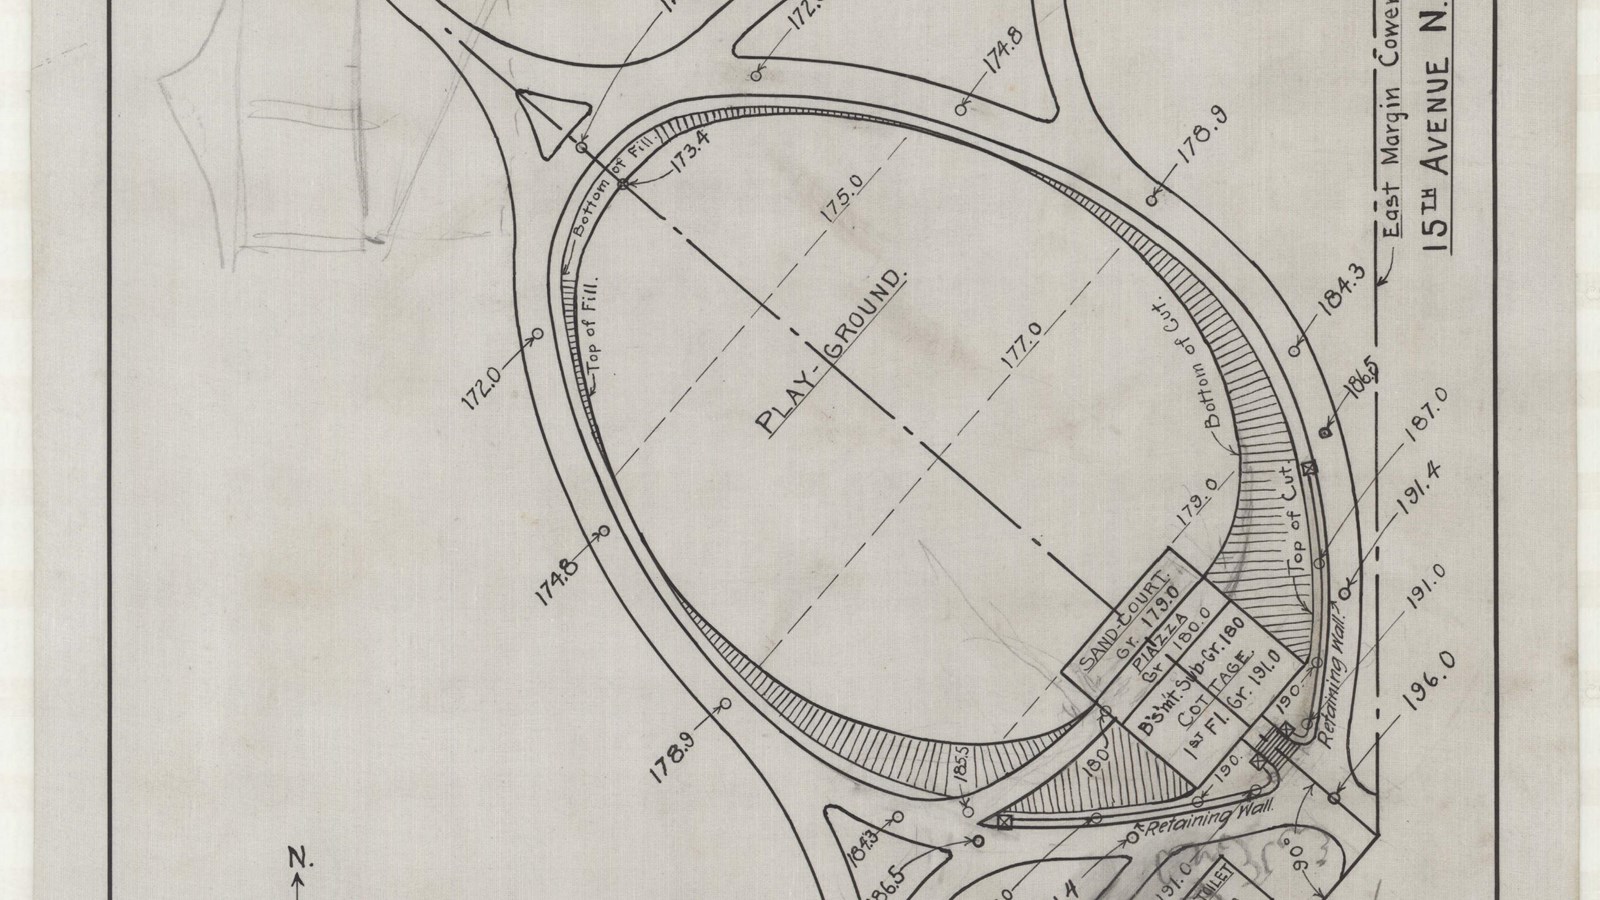 Pencil plan of circular park of oval with path around it and building on one end